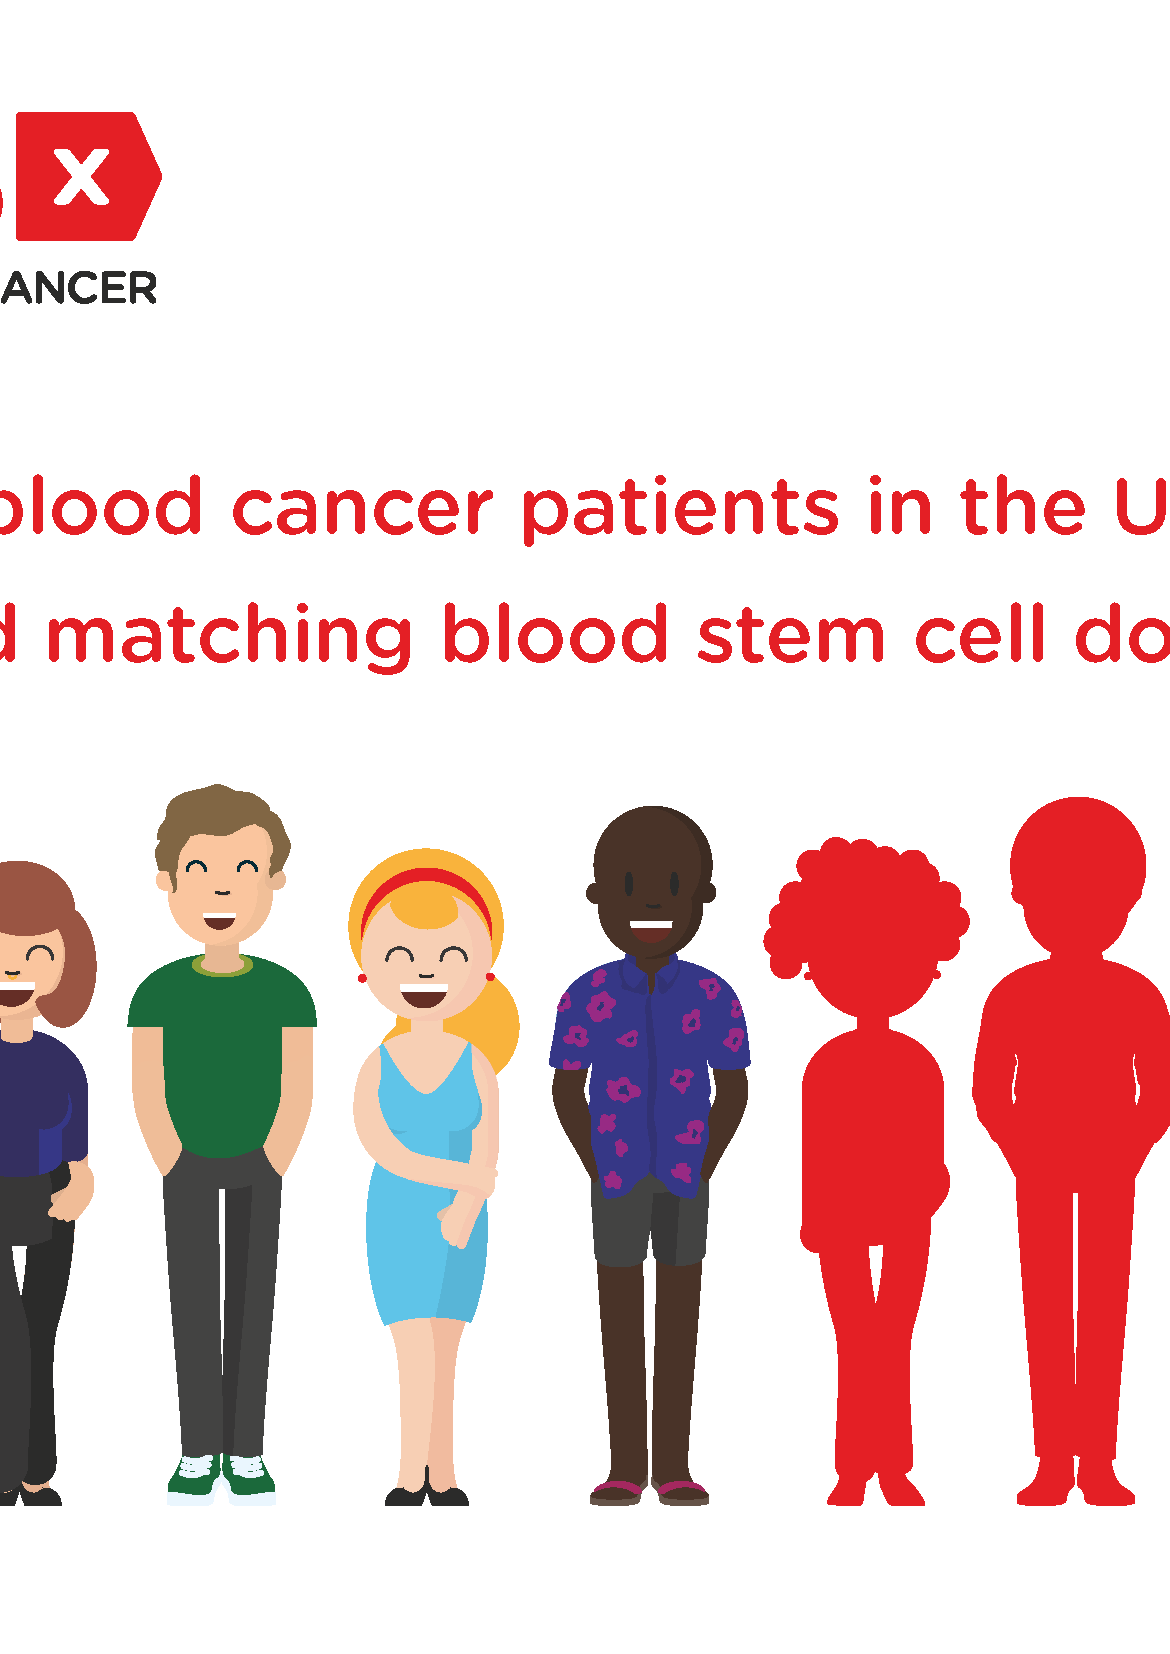 6 out of 10 blood cancer patients in the UK find an unrelated matching blood stem cell donor